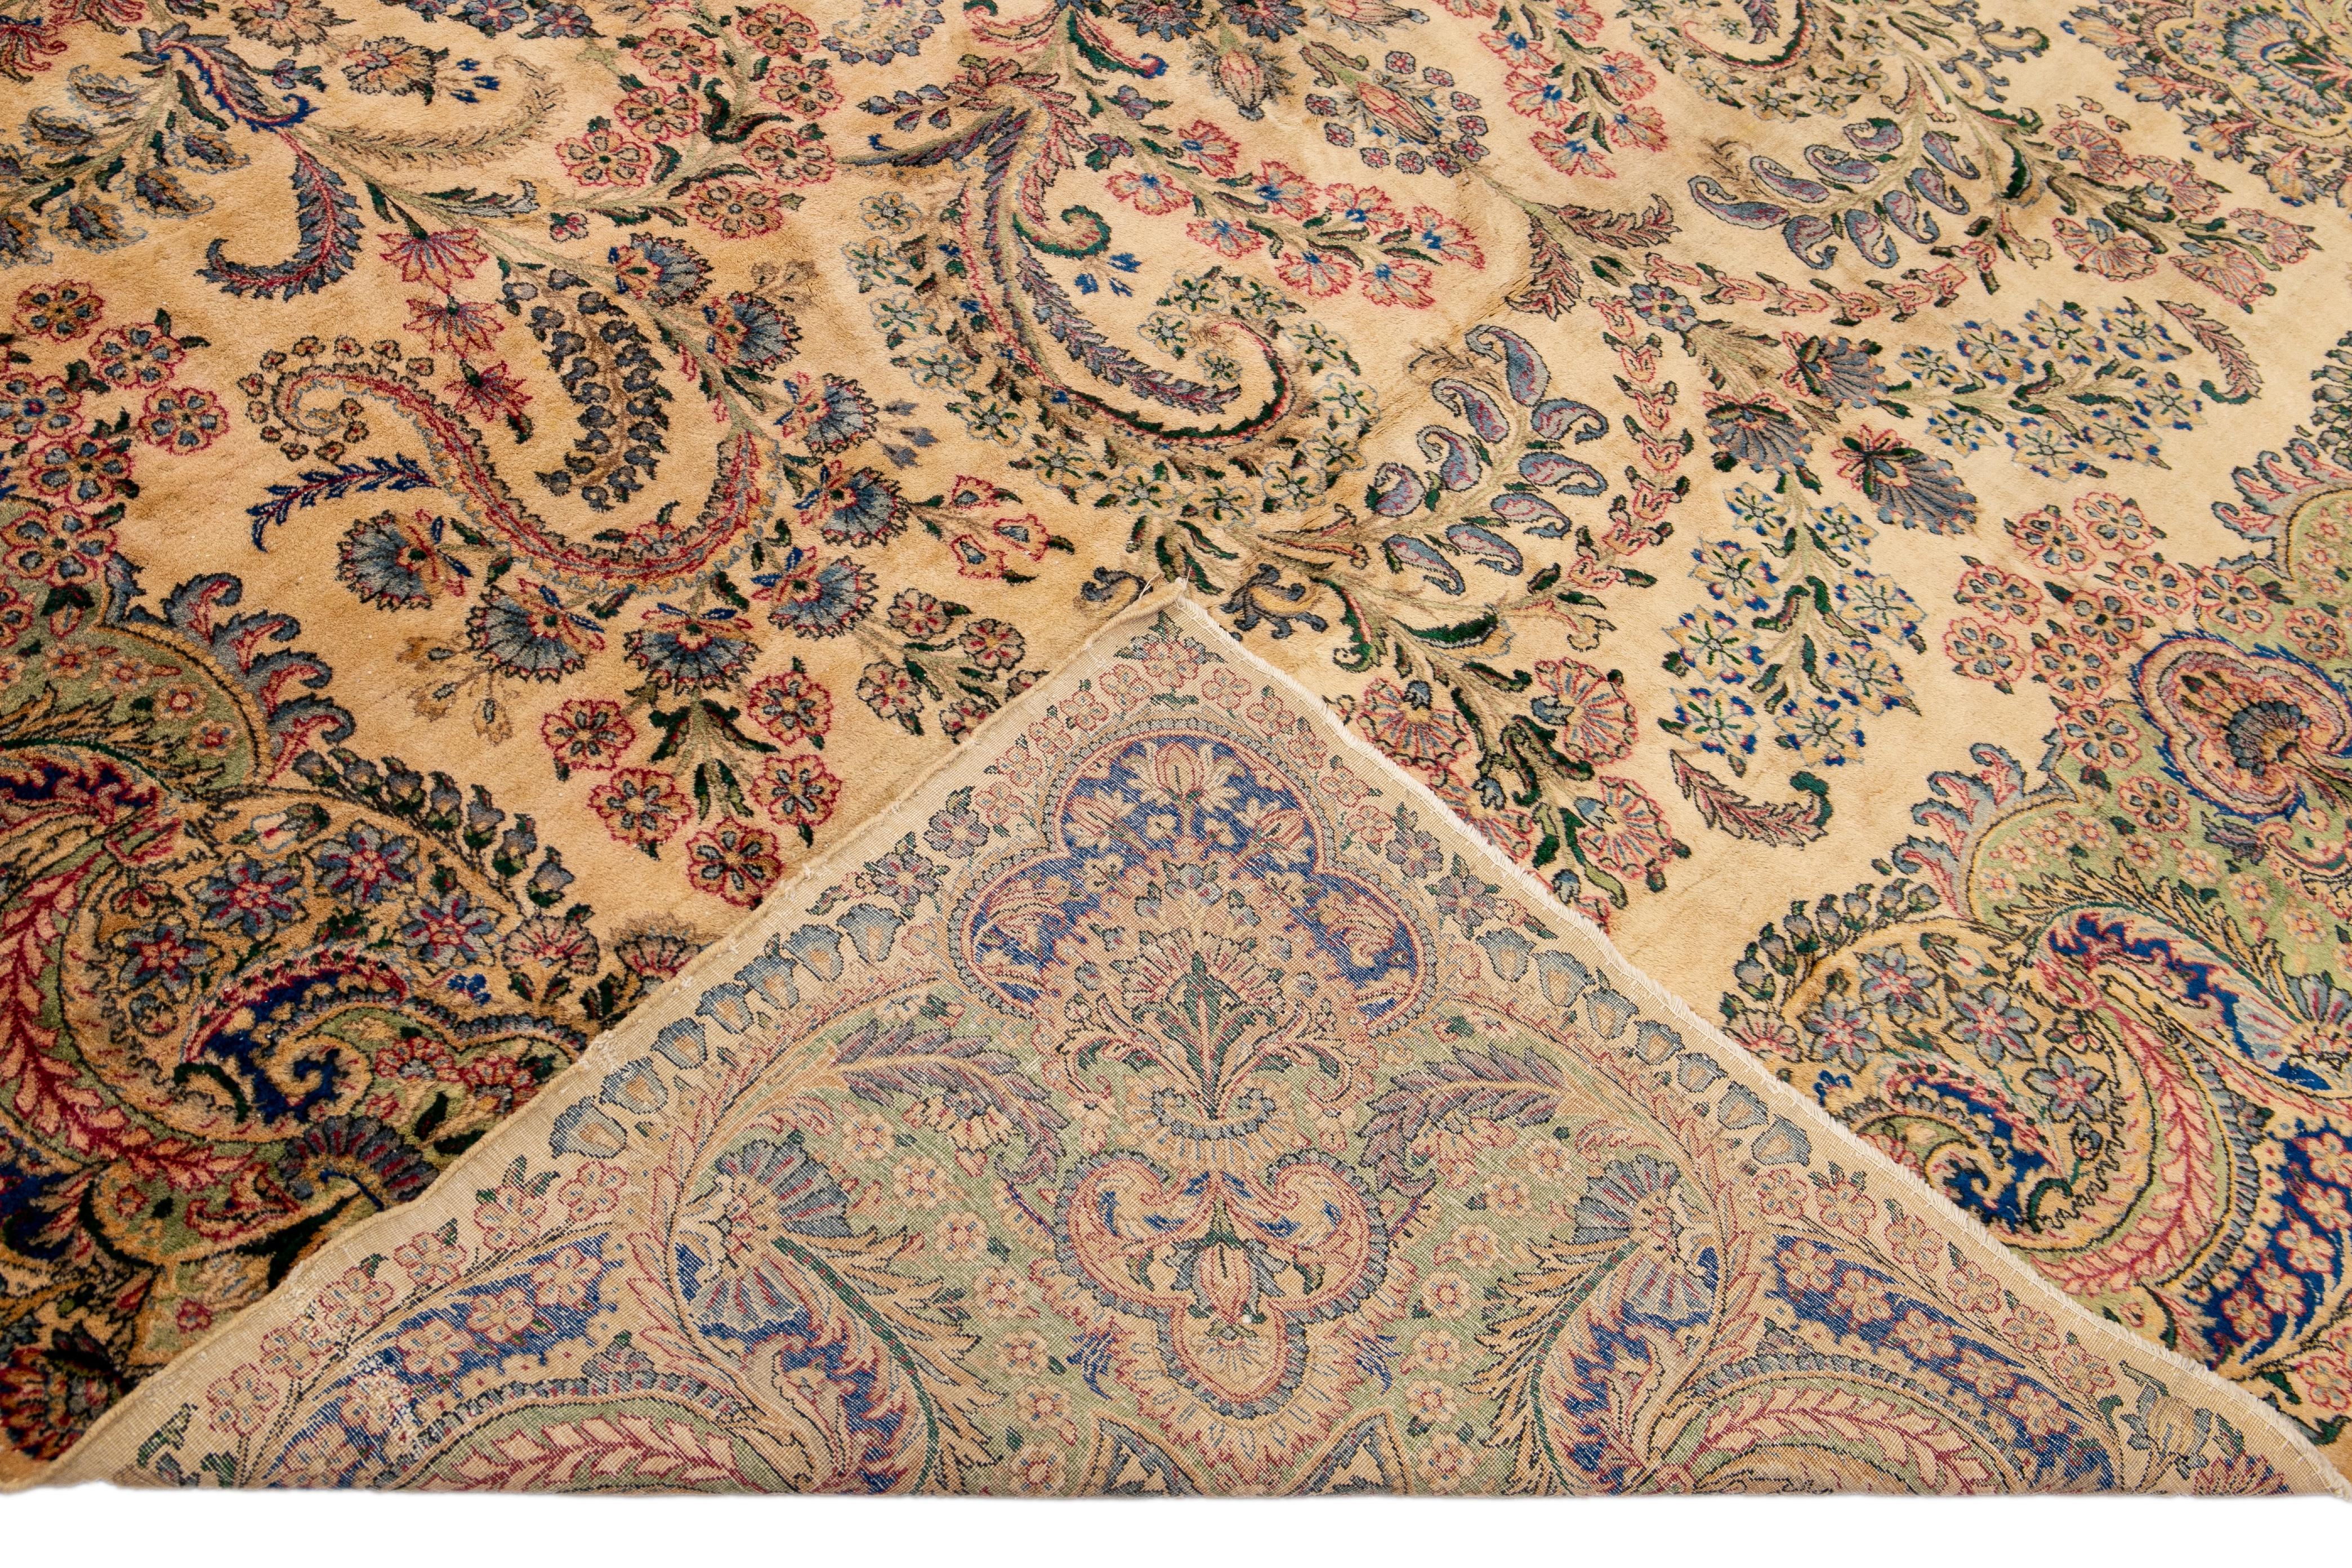 Beautiful Antique Kerman hand-knotted wool rug with the beige field. This Persian rug has a designed frame and blue, red, and green accents in a gorgeous all-over botanical floral design. 

This rug measures: 9'8